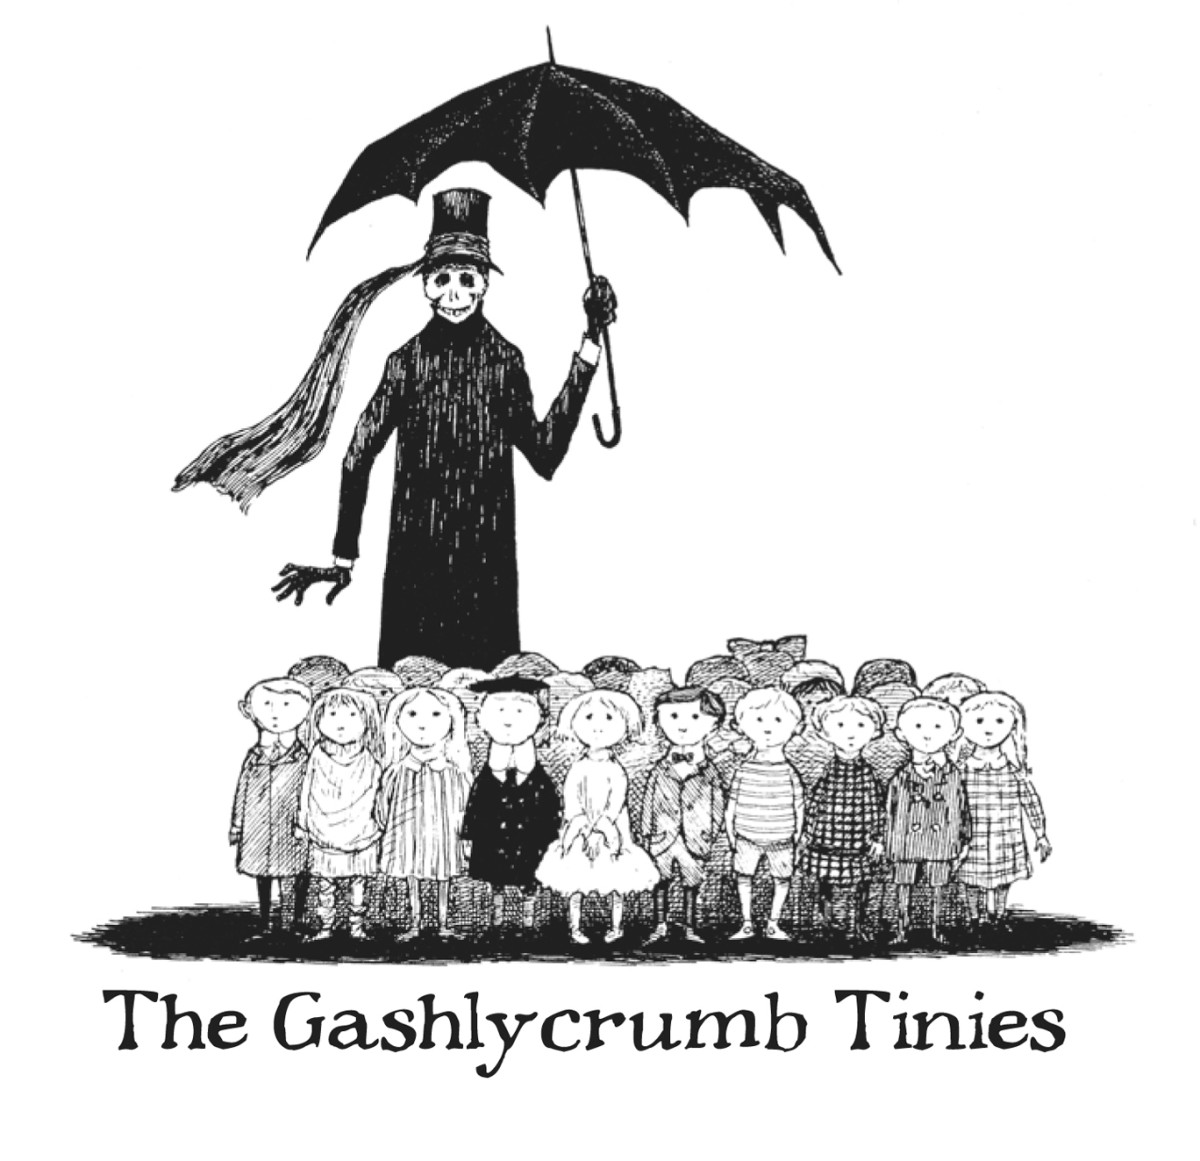 A black-and-white drawing of a crowd of small children standing with a tall skeleton. The skeleton is dressed in a dark coat with gloves and a top hat and is holding an umbrella.